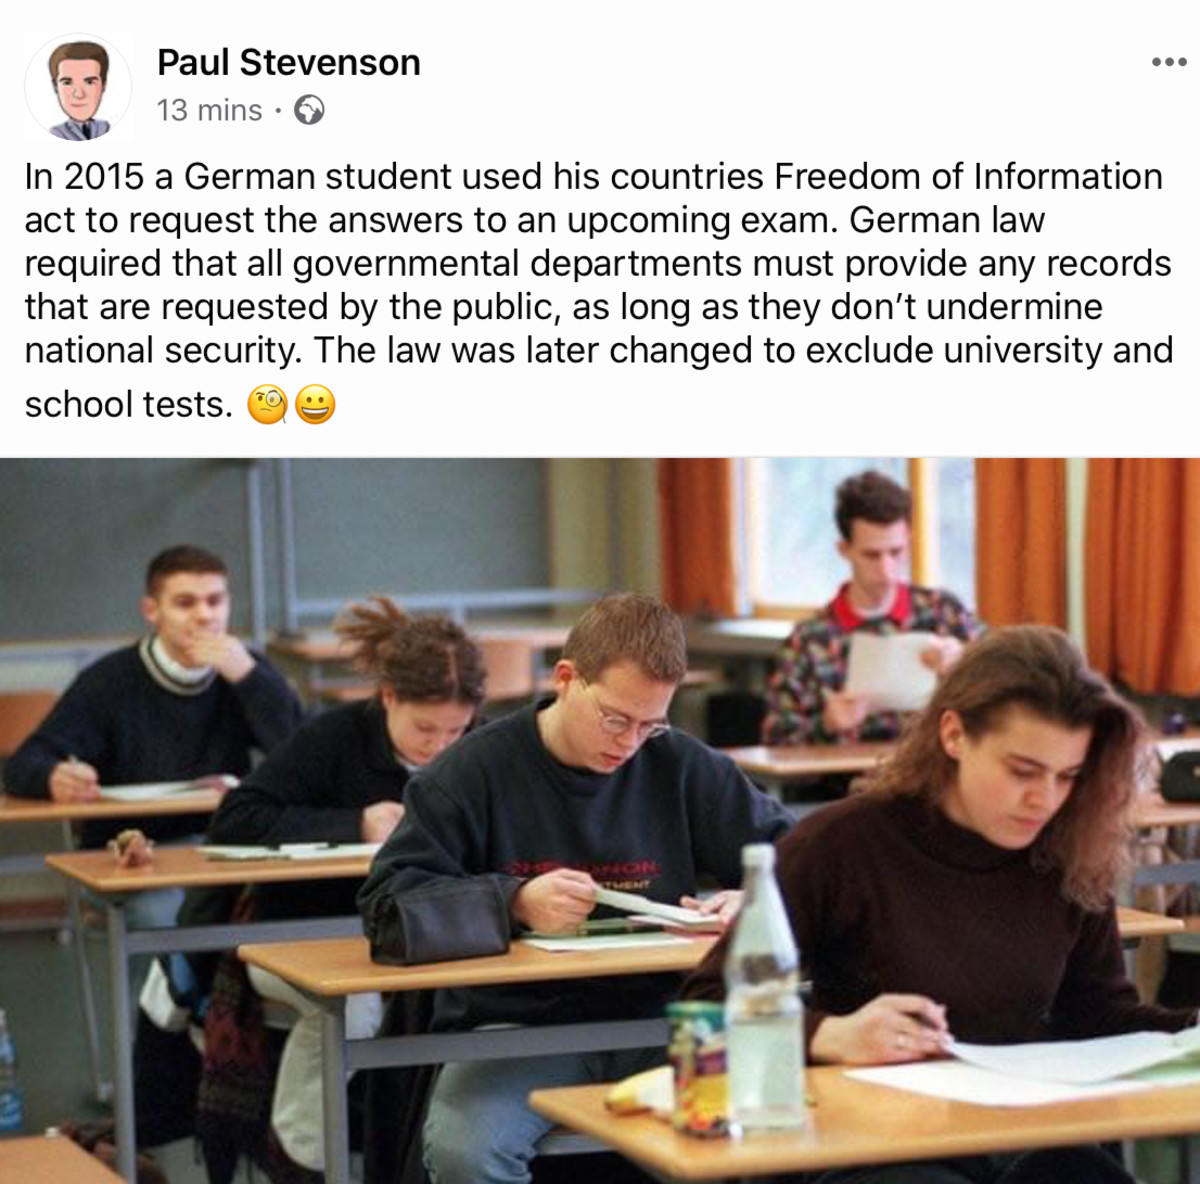 Test - Paul Stevenson 13 mins In 2015 a German student used his countries Freedom of Information act to request the answers to an upcoming exam. German law required that all governmental departments must provide any records that are requested by the publi